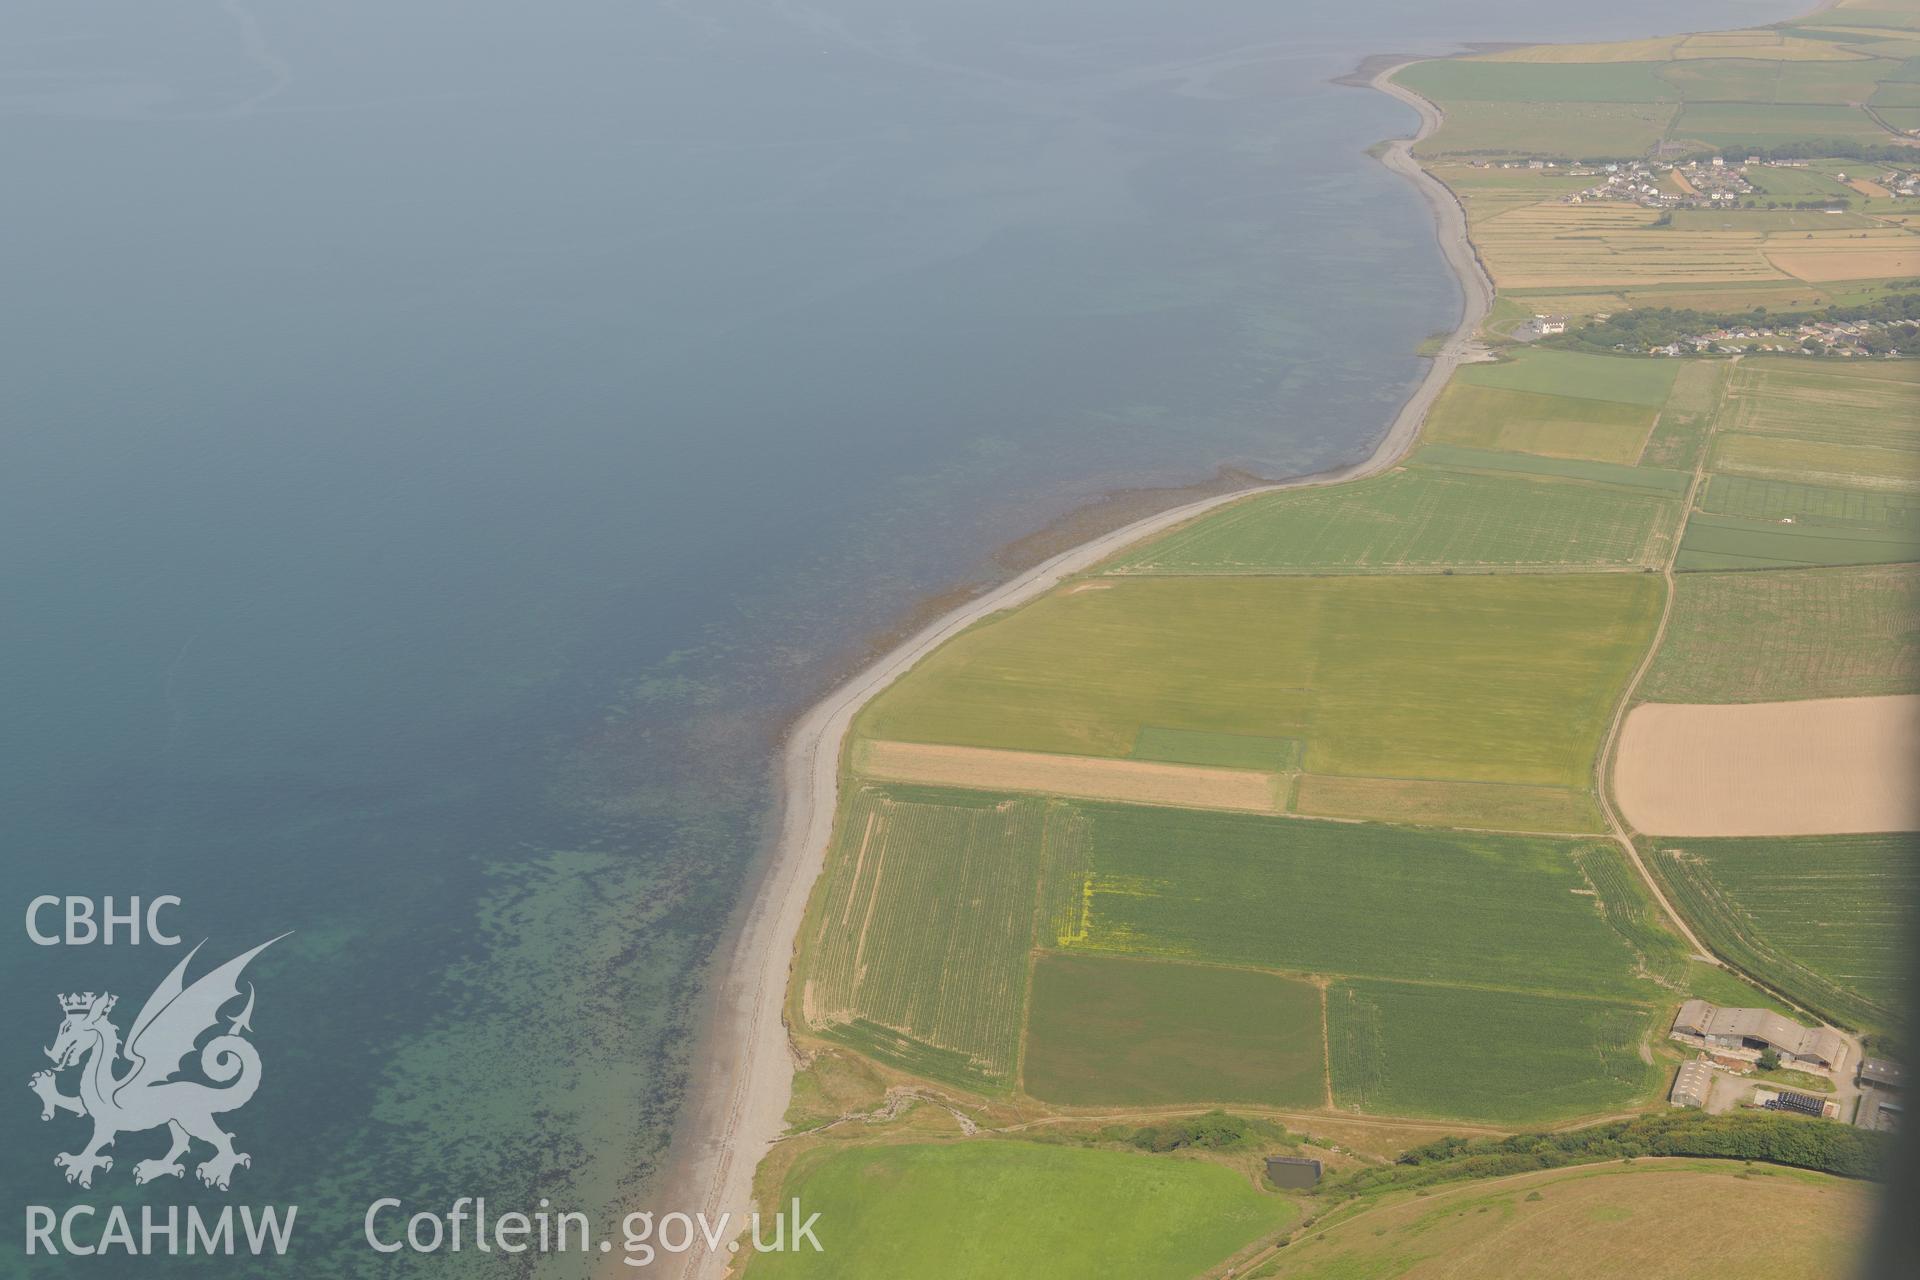 Aberarth village with Aberarth fish trap complex just off the shore. Oblique aerial photograph taken during the Royal Commission?s programme of archaeological aerial reconnaissance by Toby Driver on 12th July 2013.